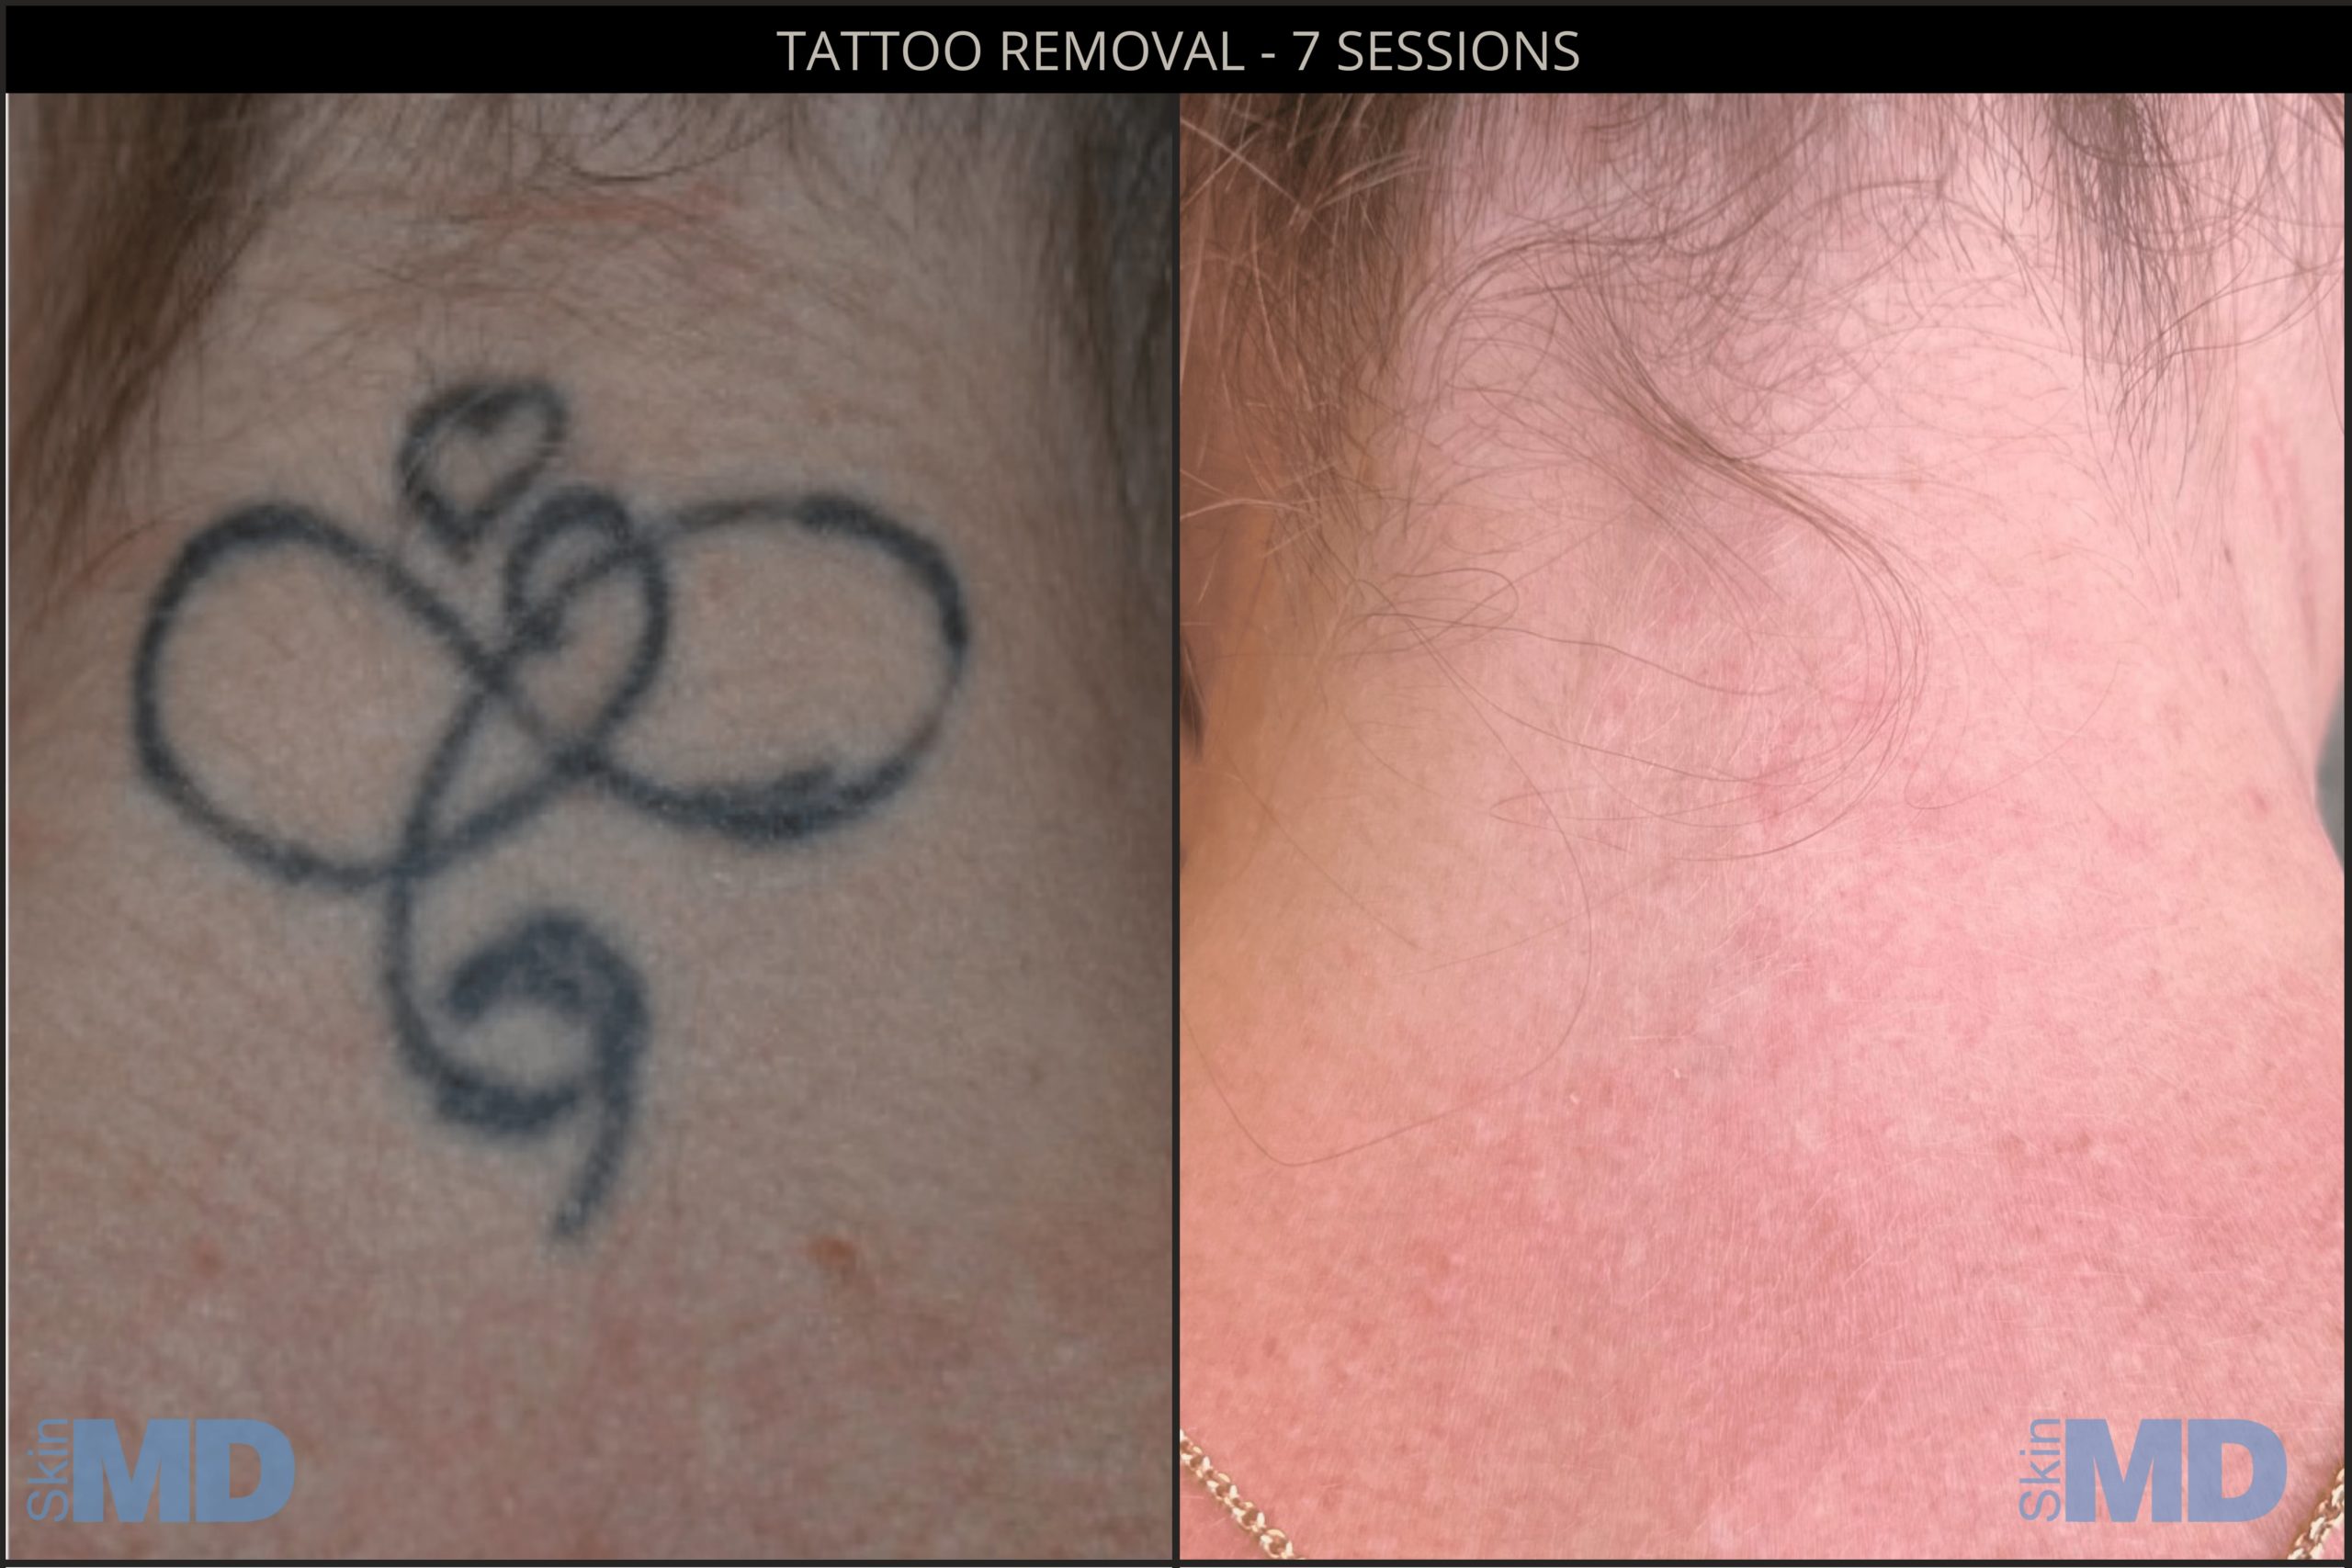 Before and after tattoo removal results